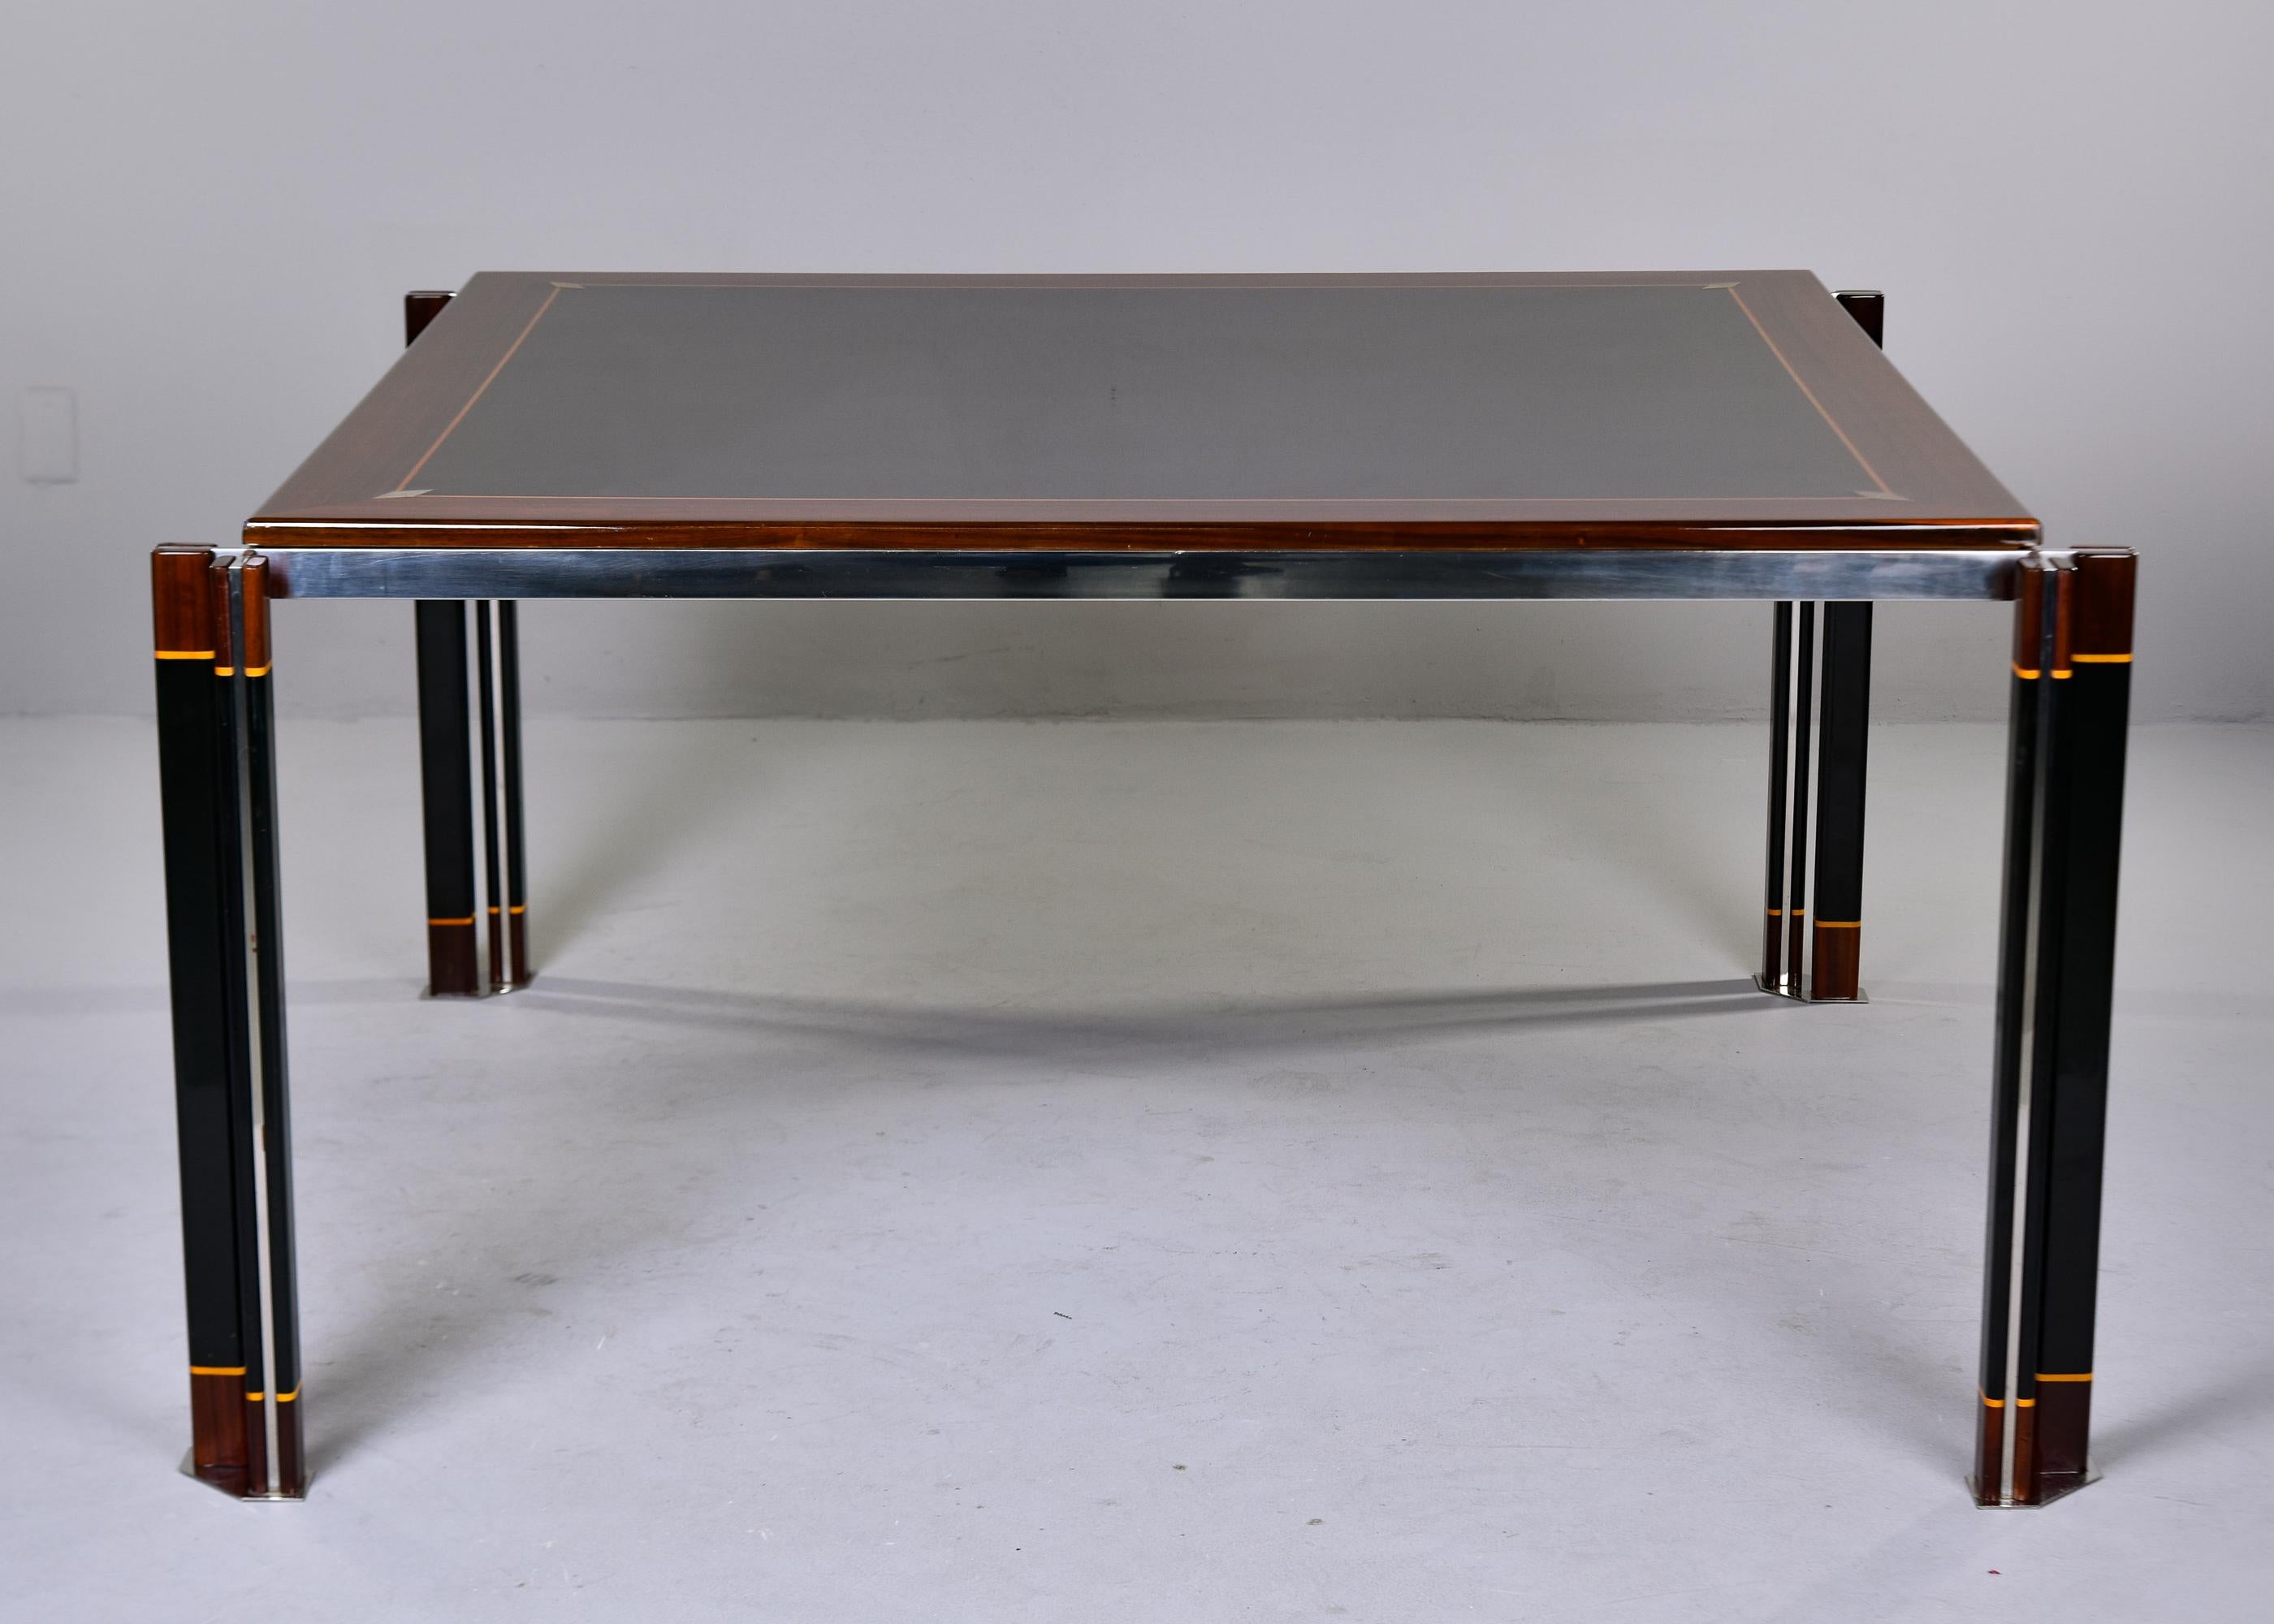 Italian Modernist Square Dining Table with Steel Detailing by Paolo Barracchia For Sale 5